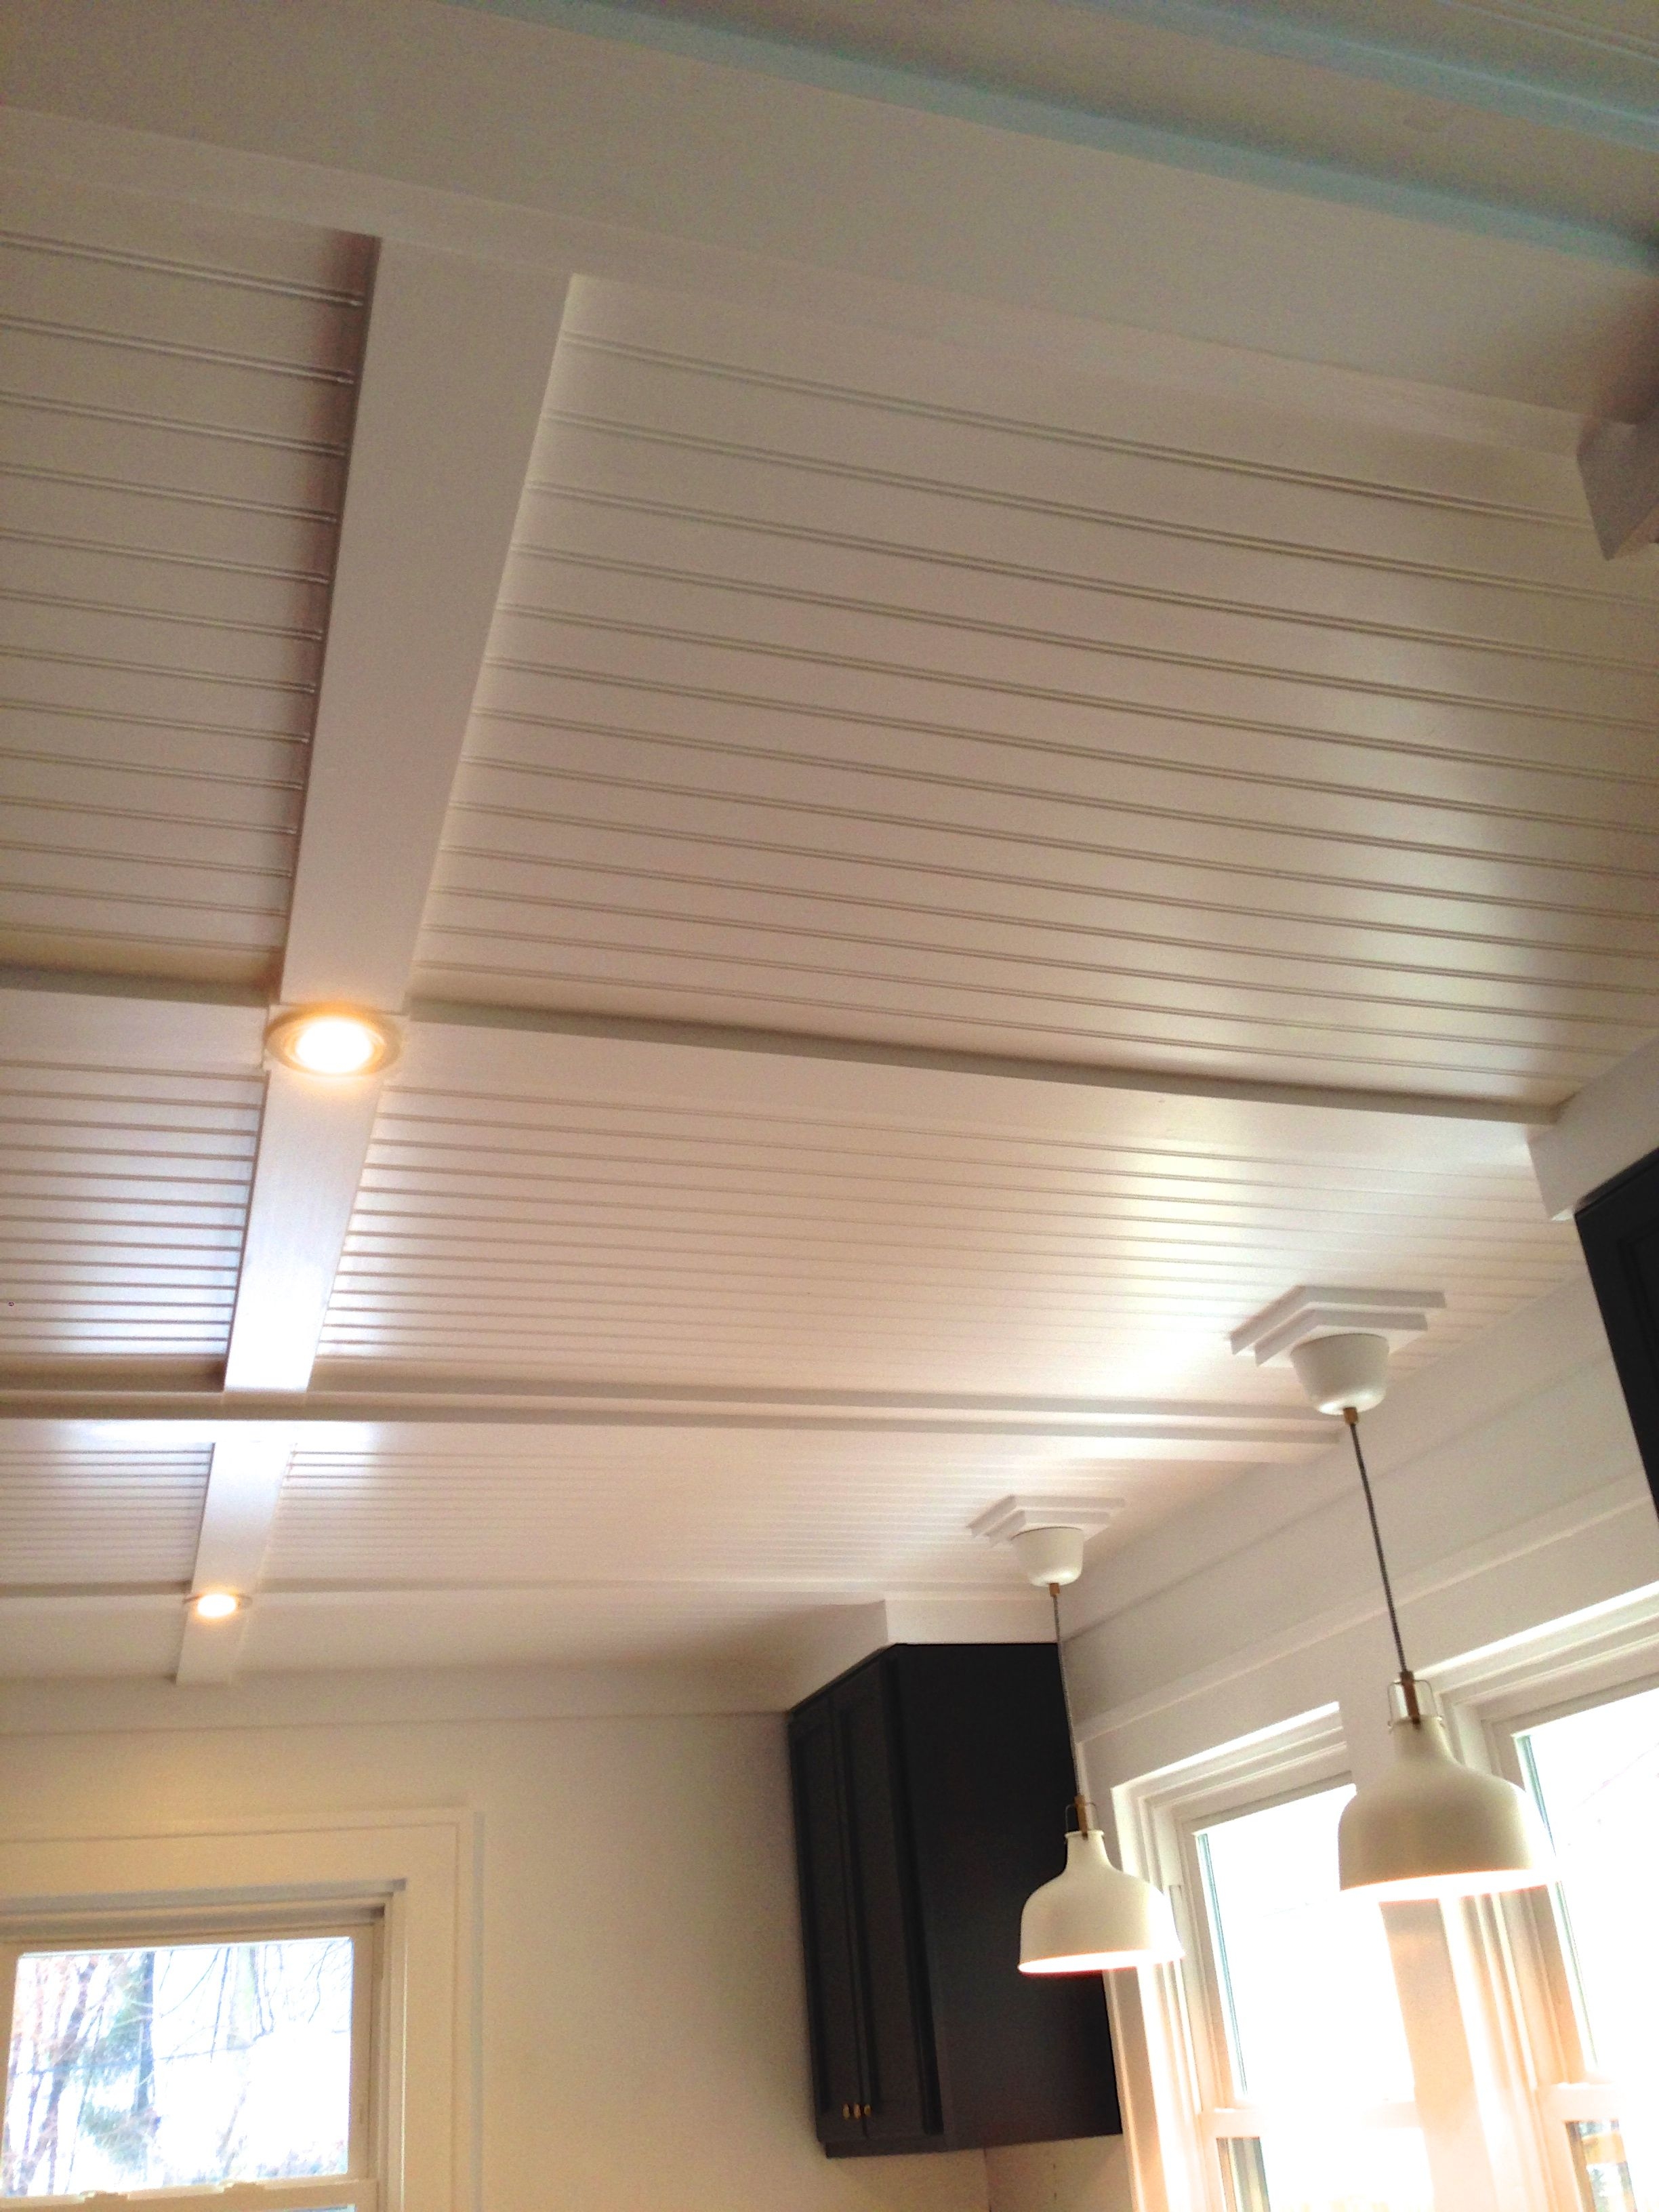 Cover Up Ceiling Tiles